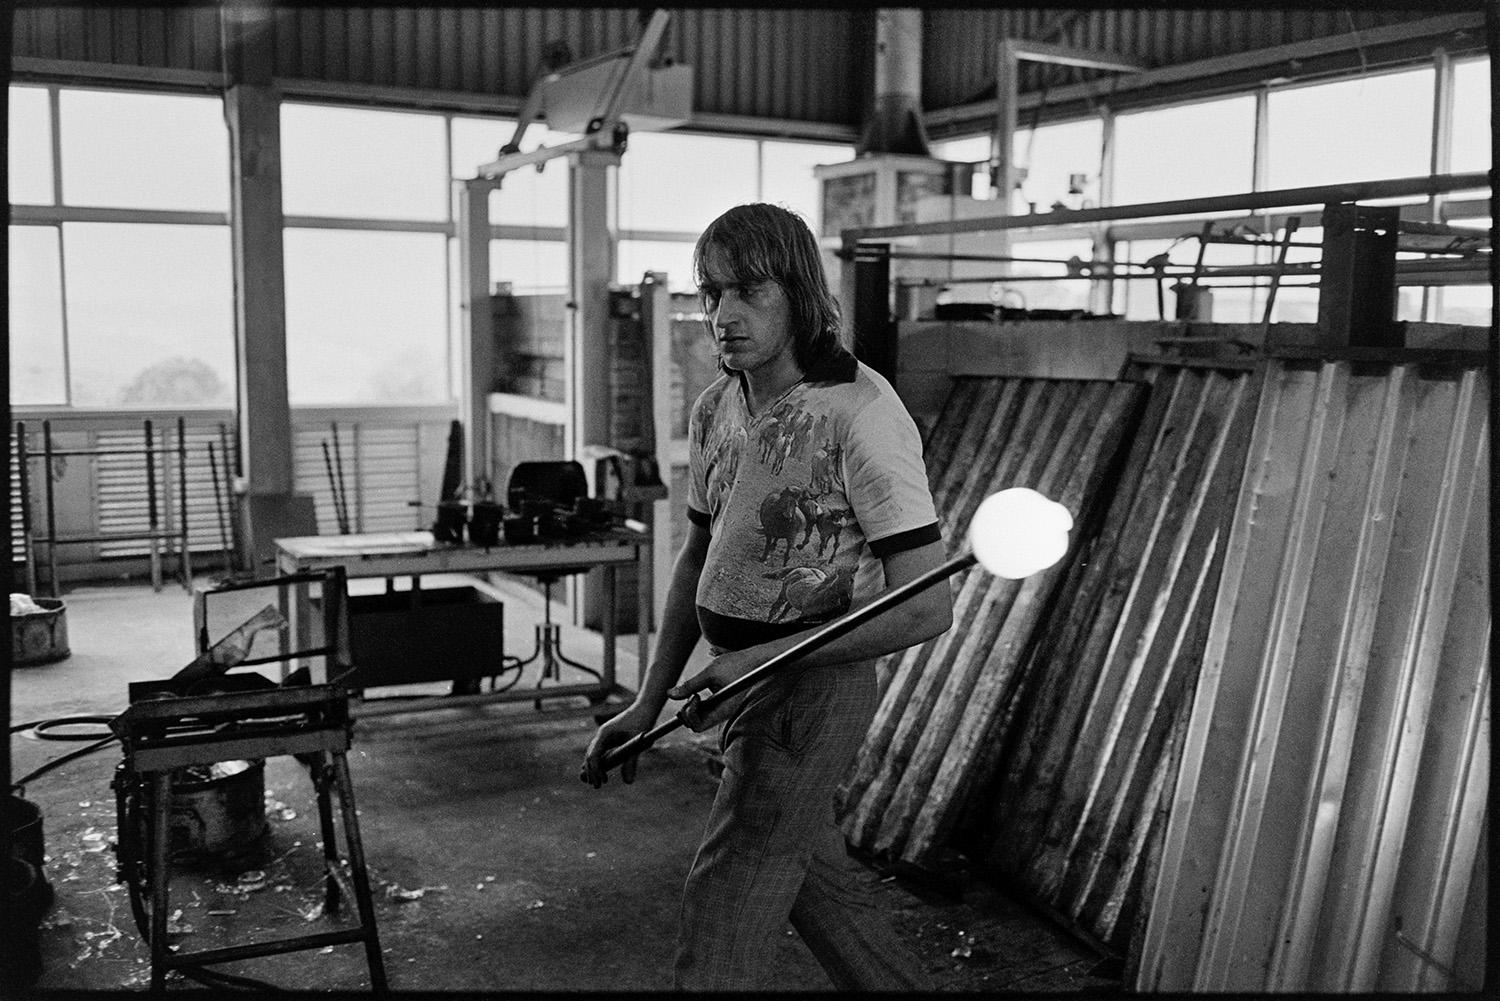 Management and workers at glass factory. 
[A man carrying a stick or blowpipe with molten glass at the Dartington Glass factory, now known as Dartington Crystal, in Torrington.]